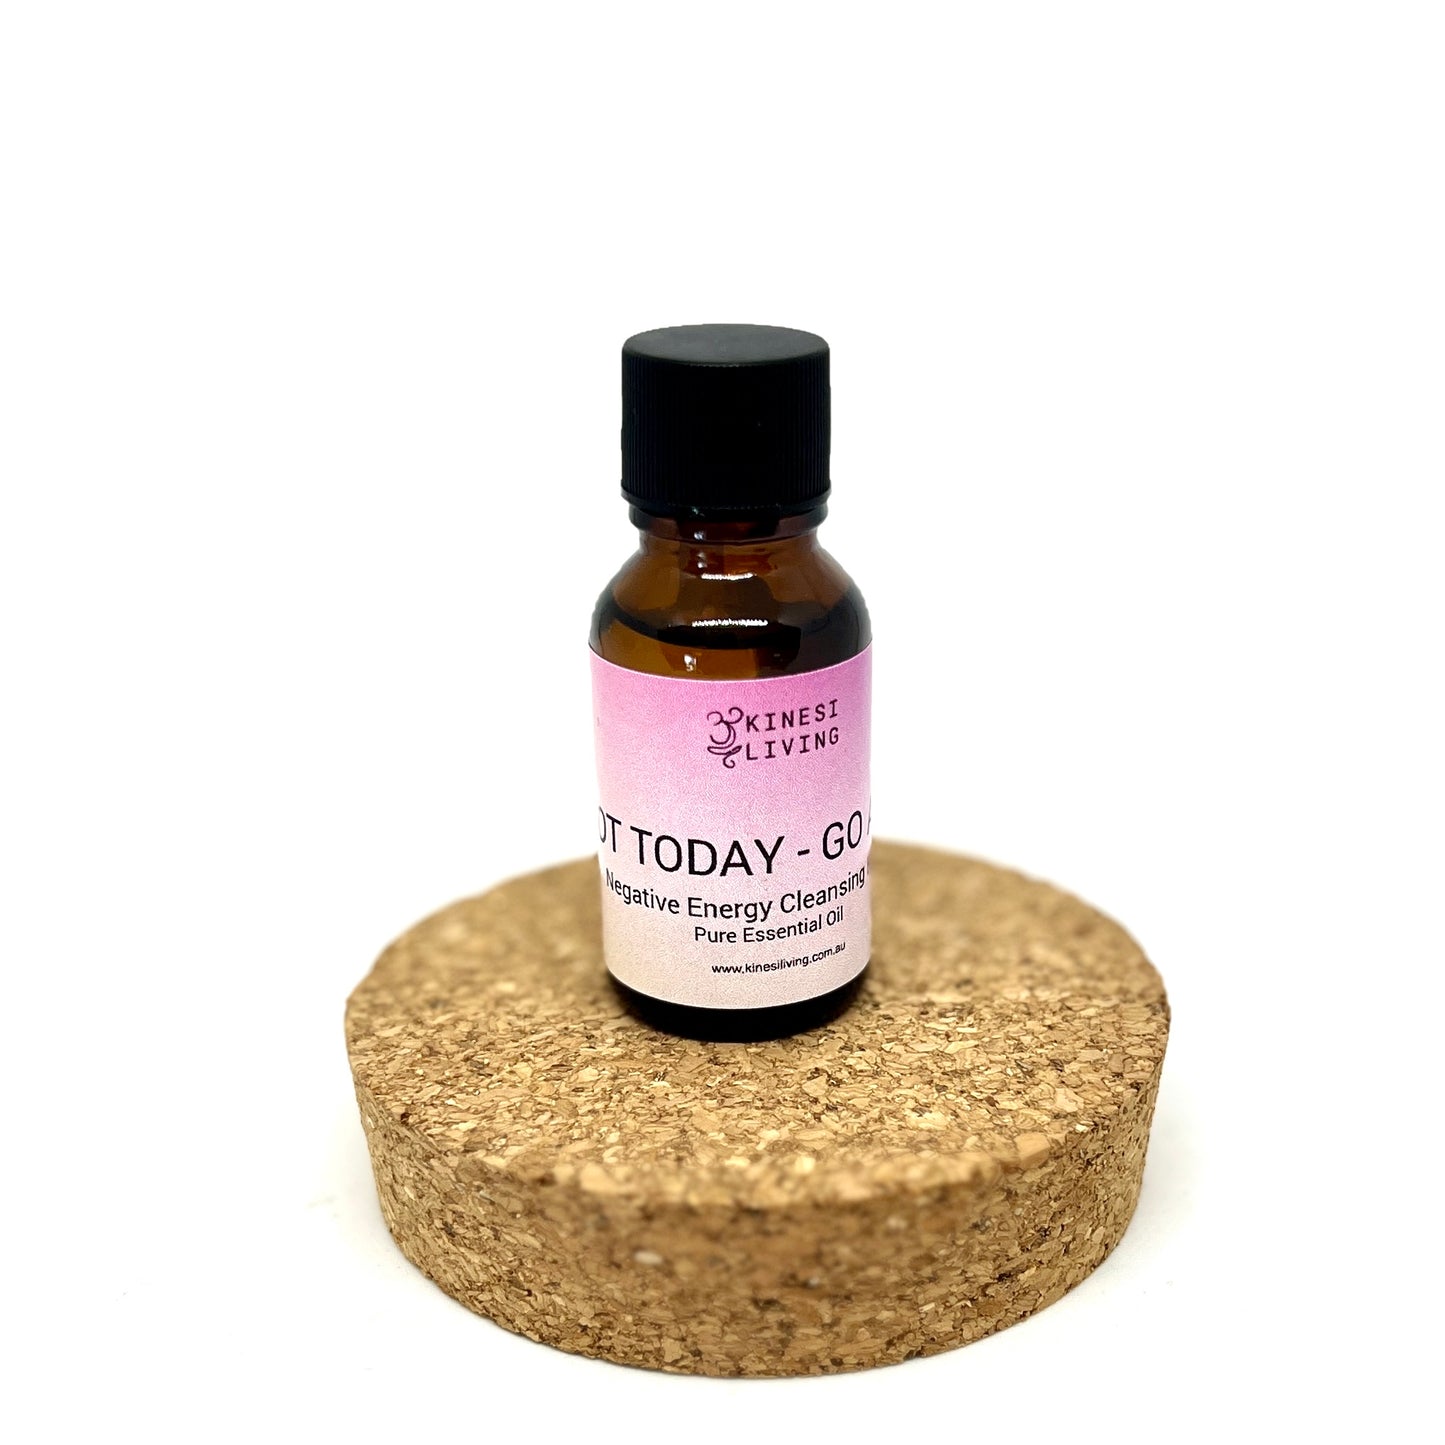 Negative Energy Cleansing Blend - Not Today - Go Away!!